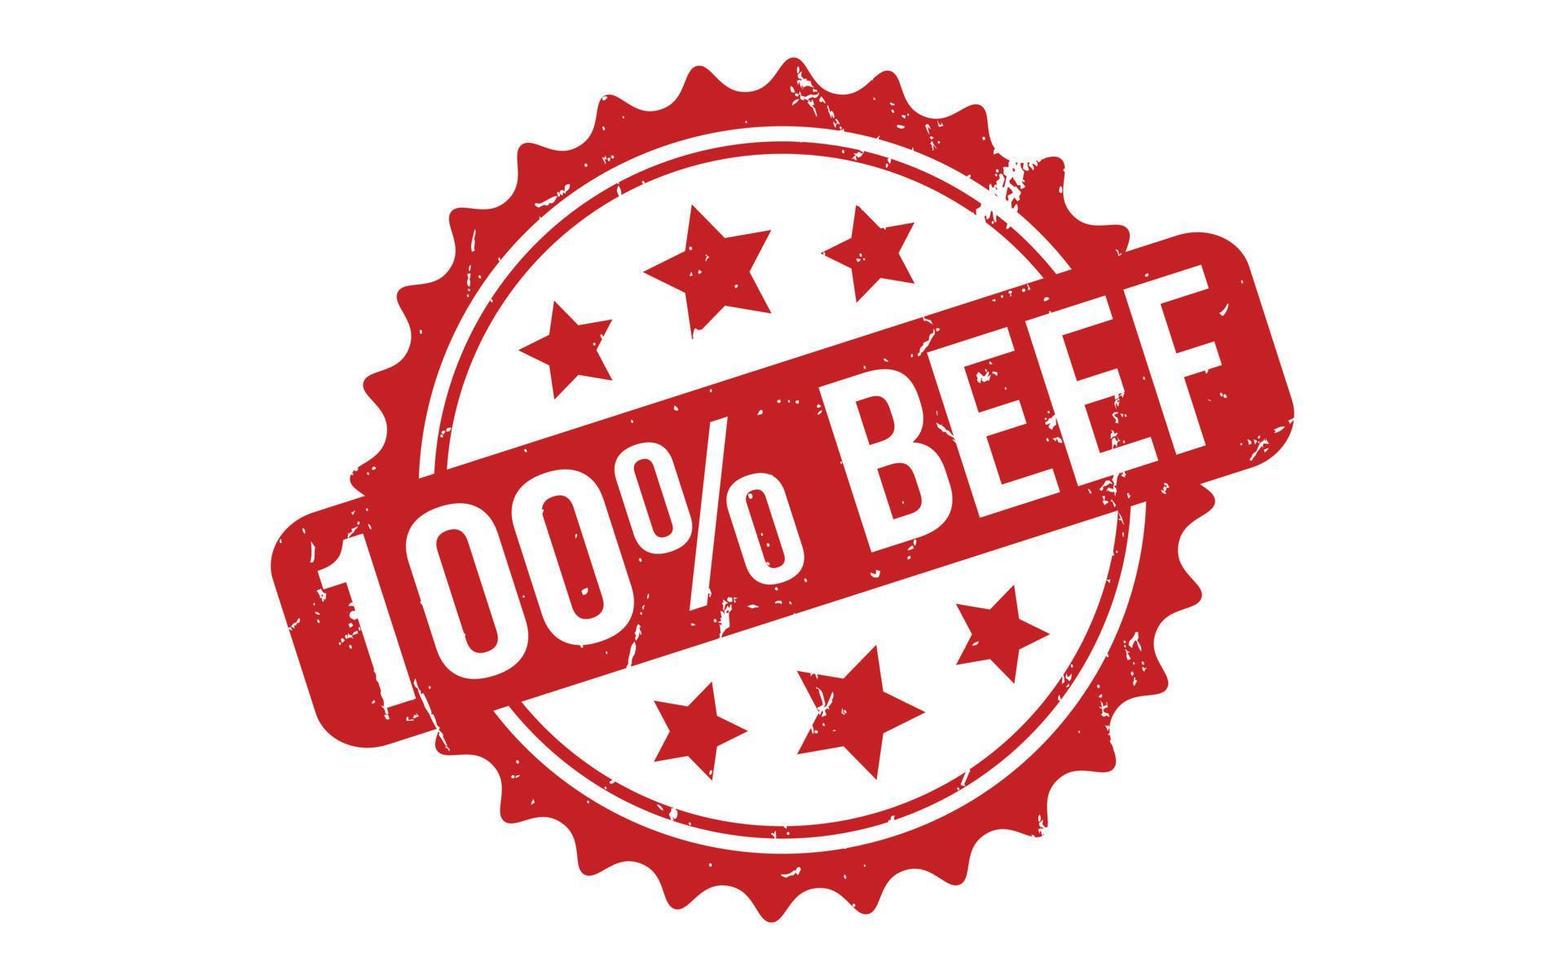 100 Percent Beef Rubber Stamp Seal Vector